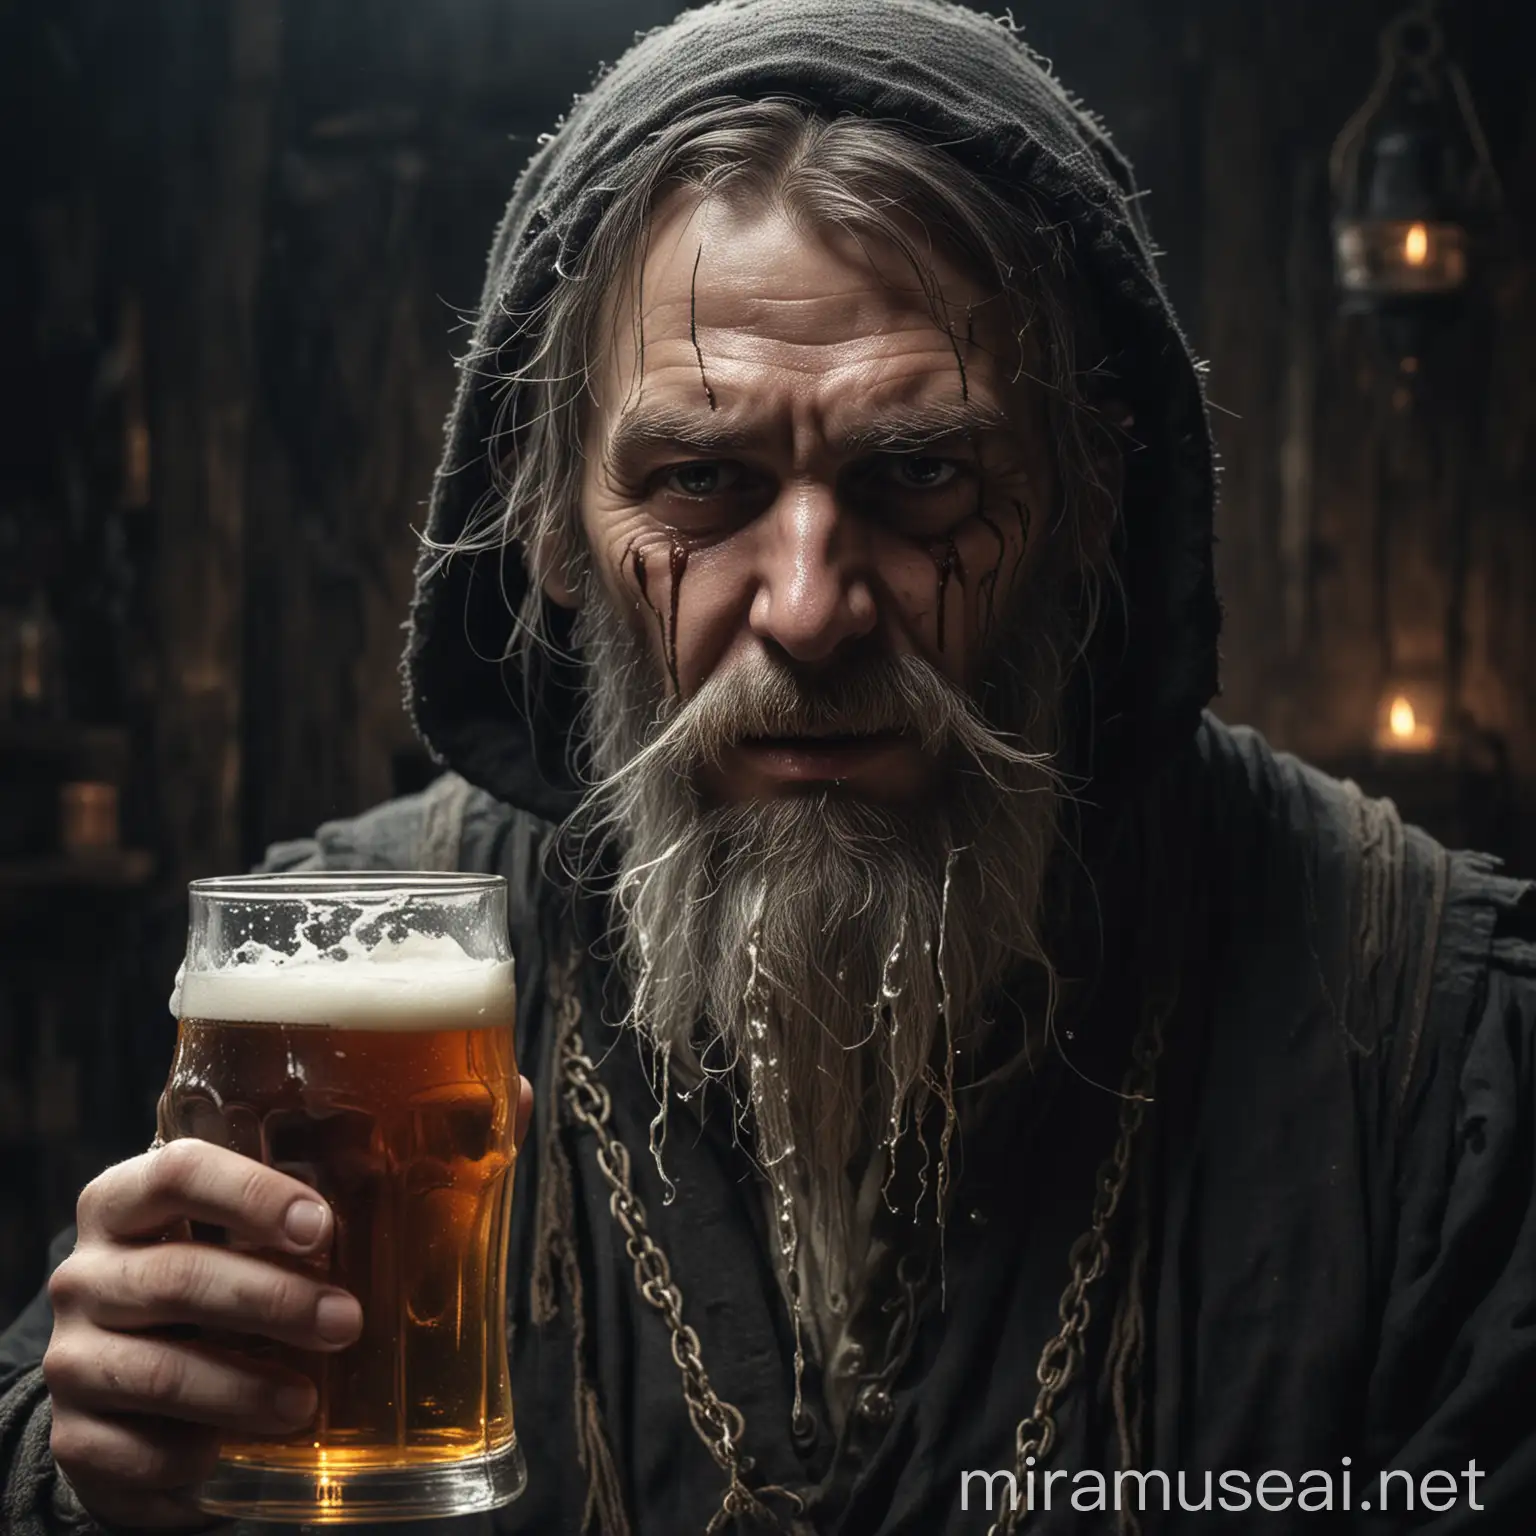 Sinister Innkeeper Cursing Amidst Dripping Beer